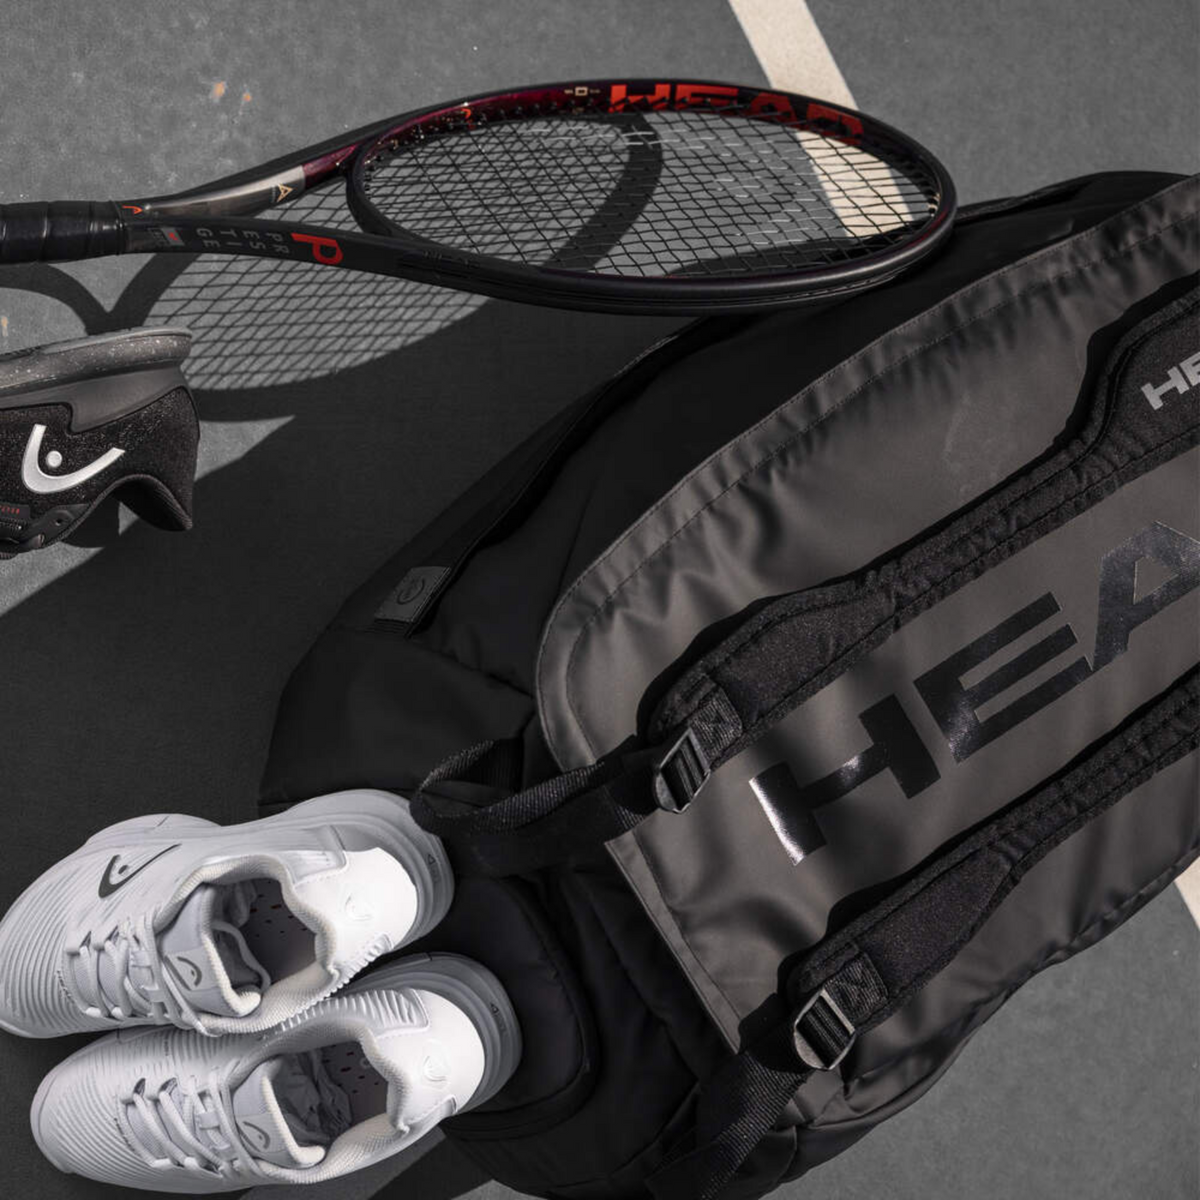 Head Tennis Lifestyle Photo showing bag, racquet, and shoes